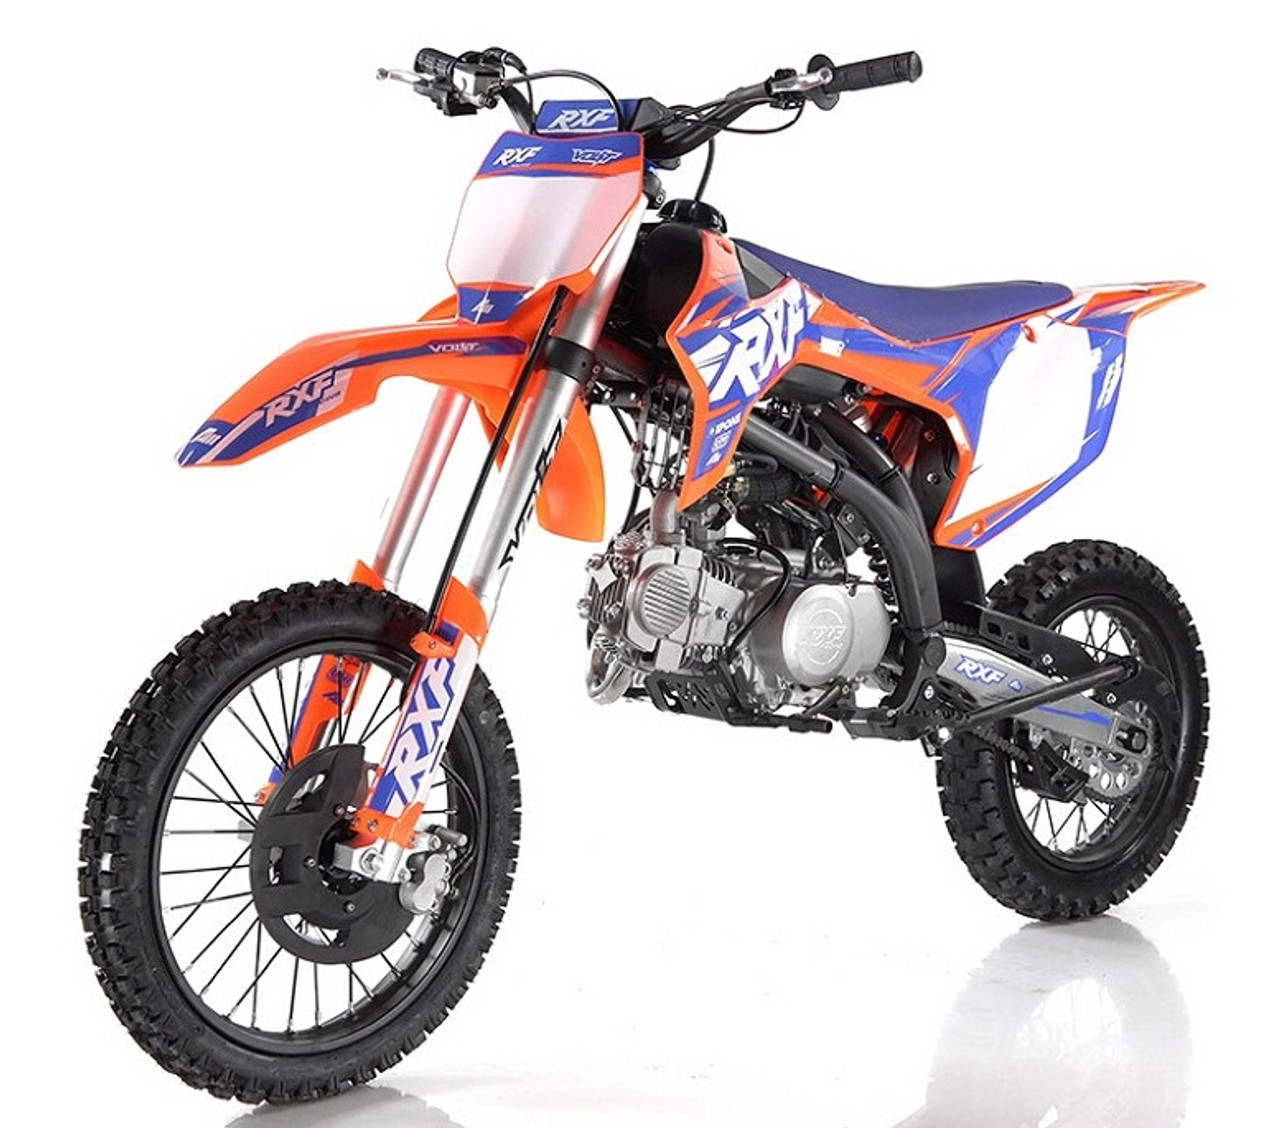 Apollo RXF 150 Freeride 140cc Dirt Bike, Manual Transmission, (17"/14") Tires - Fully Assembled And Tested - Orange